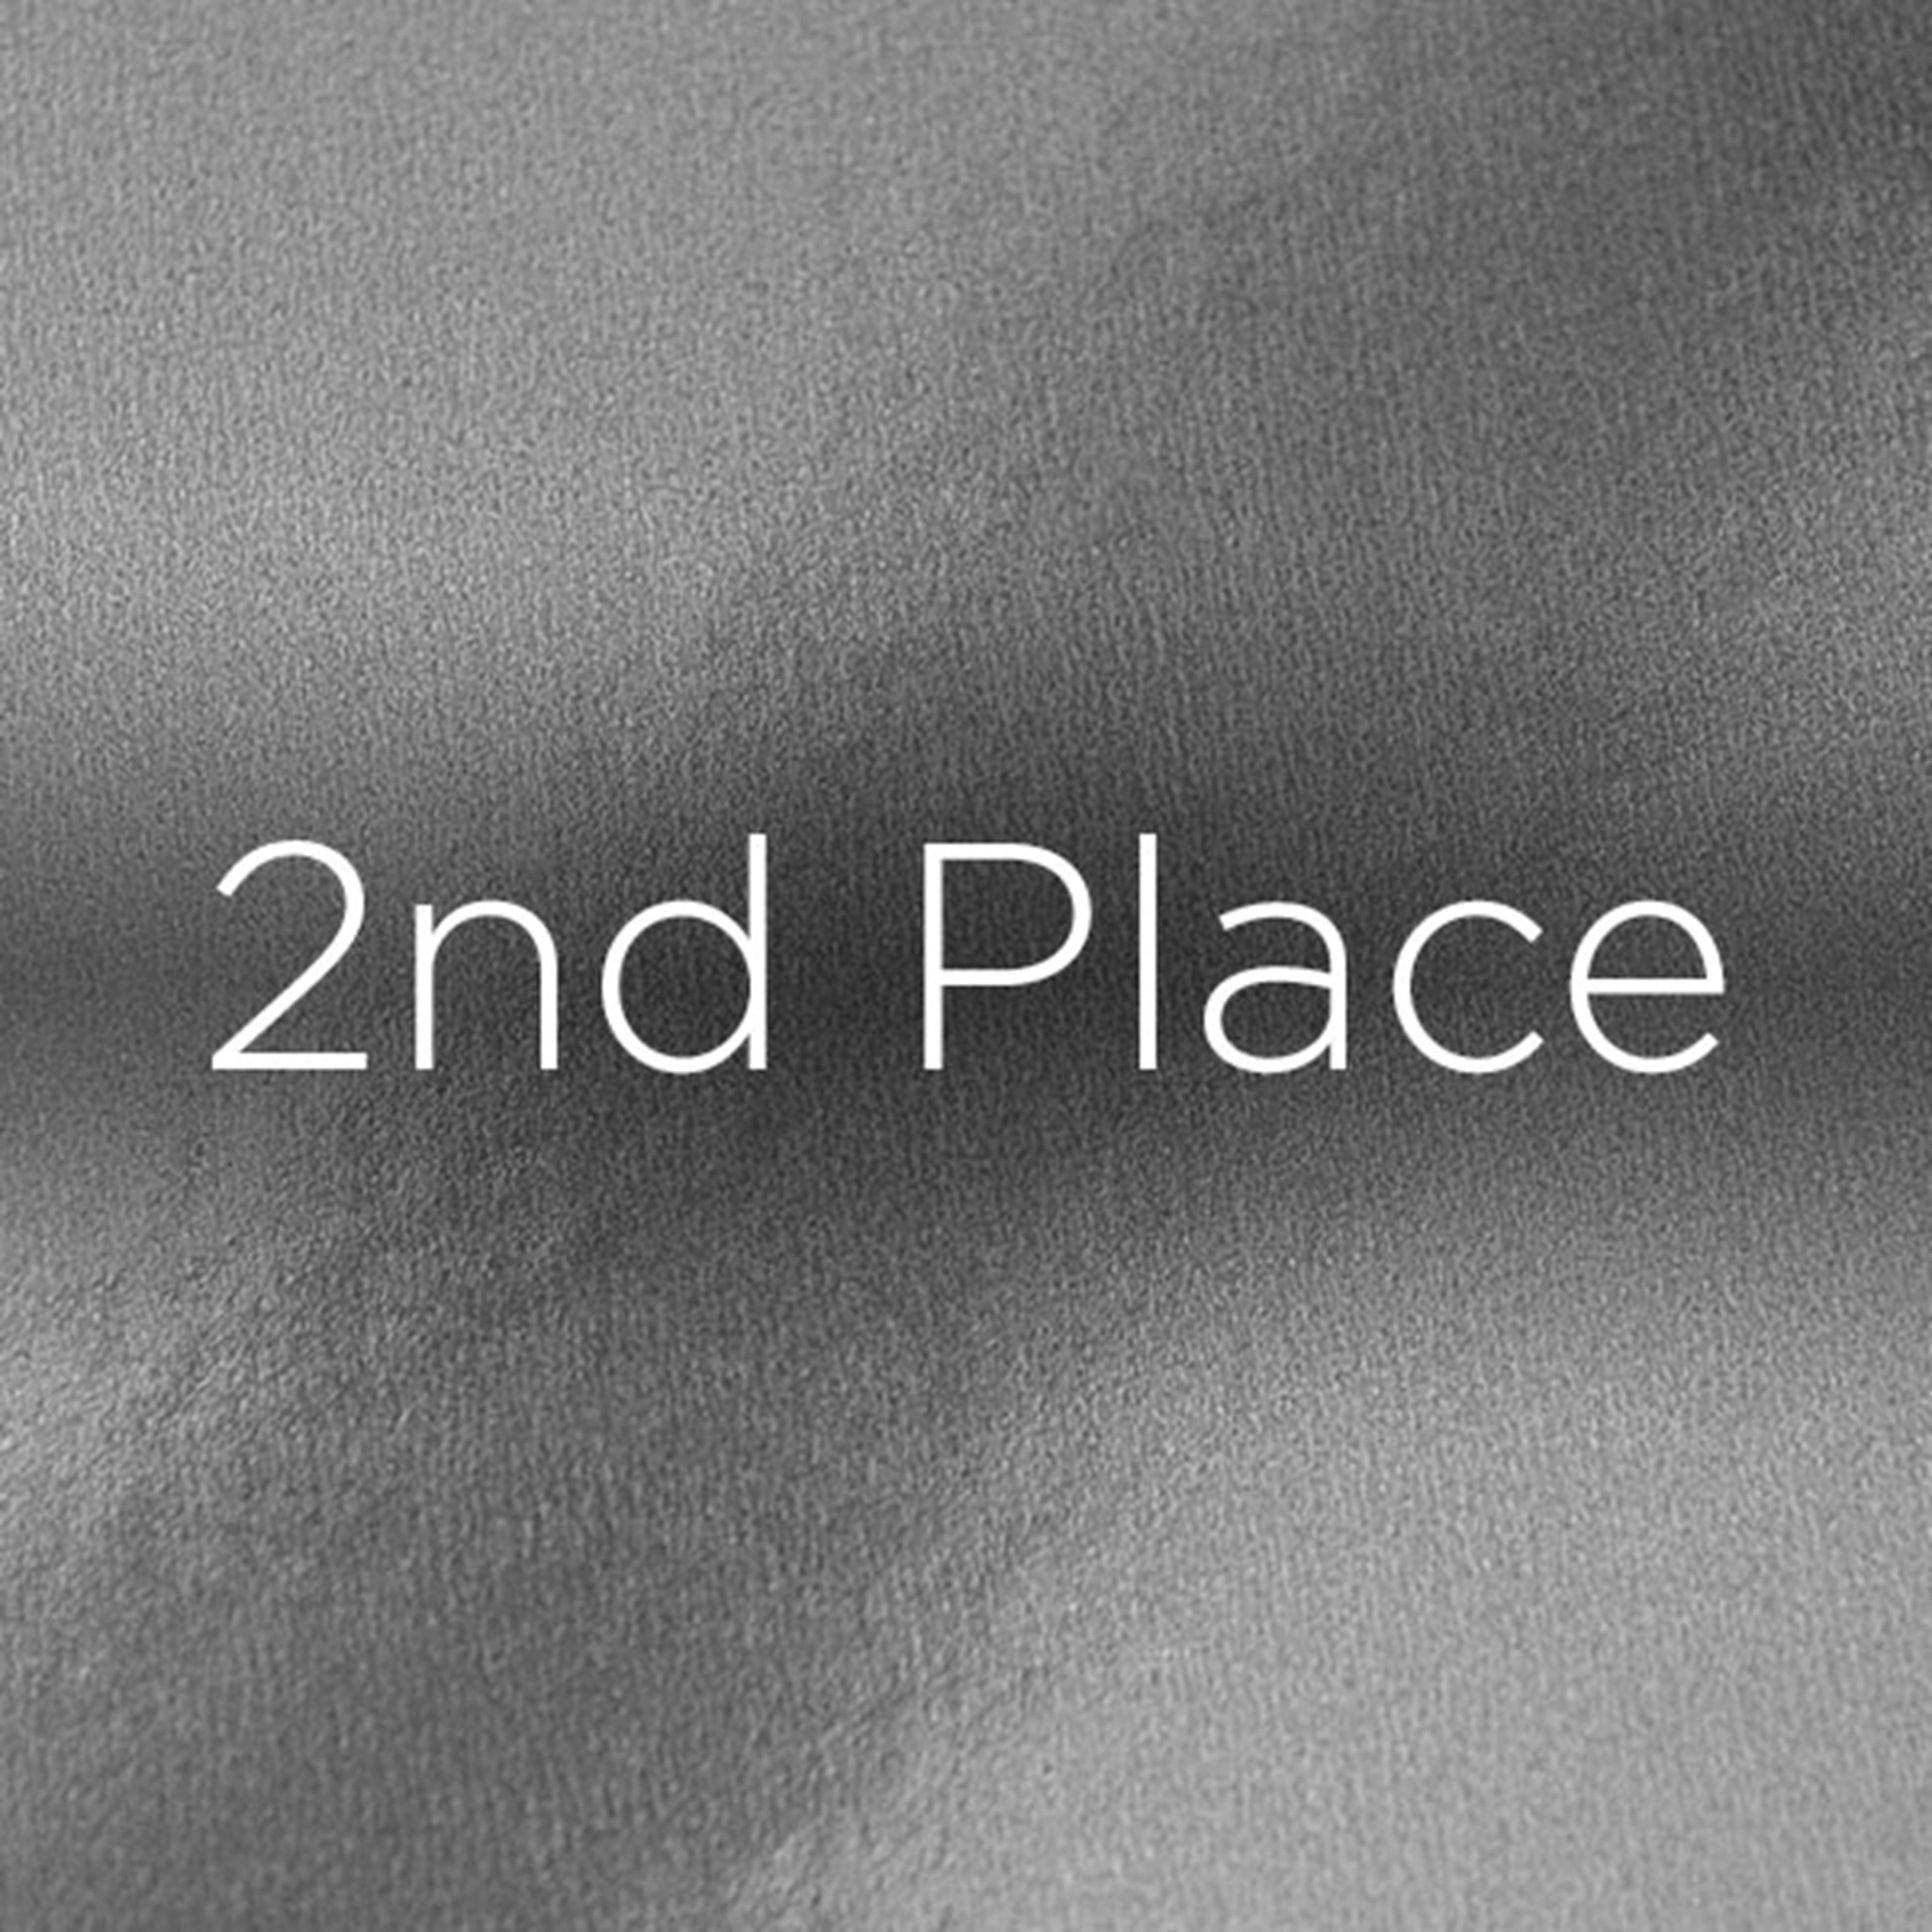 Second place text on silver background